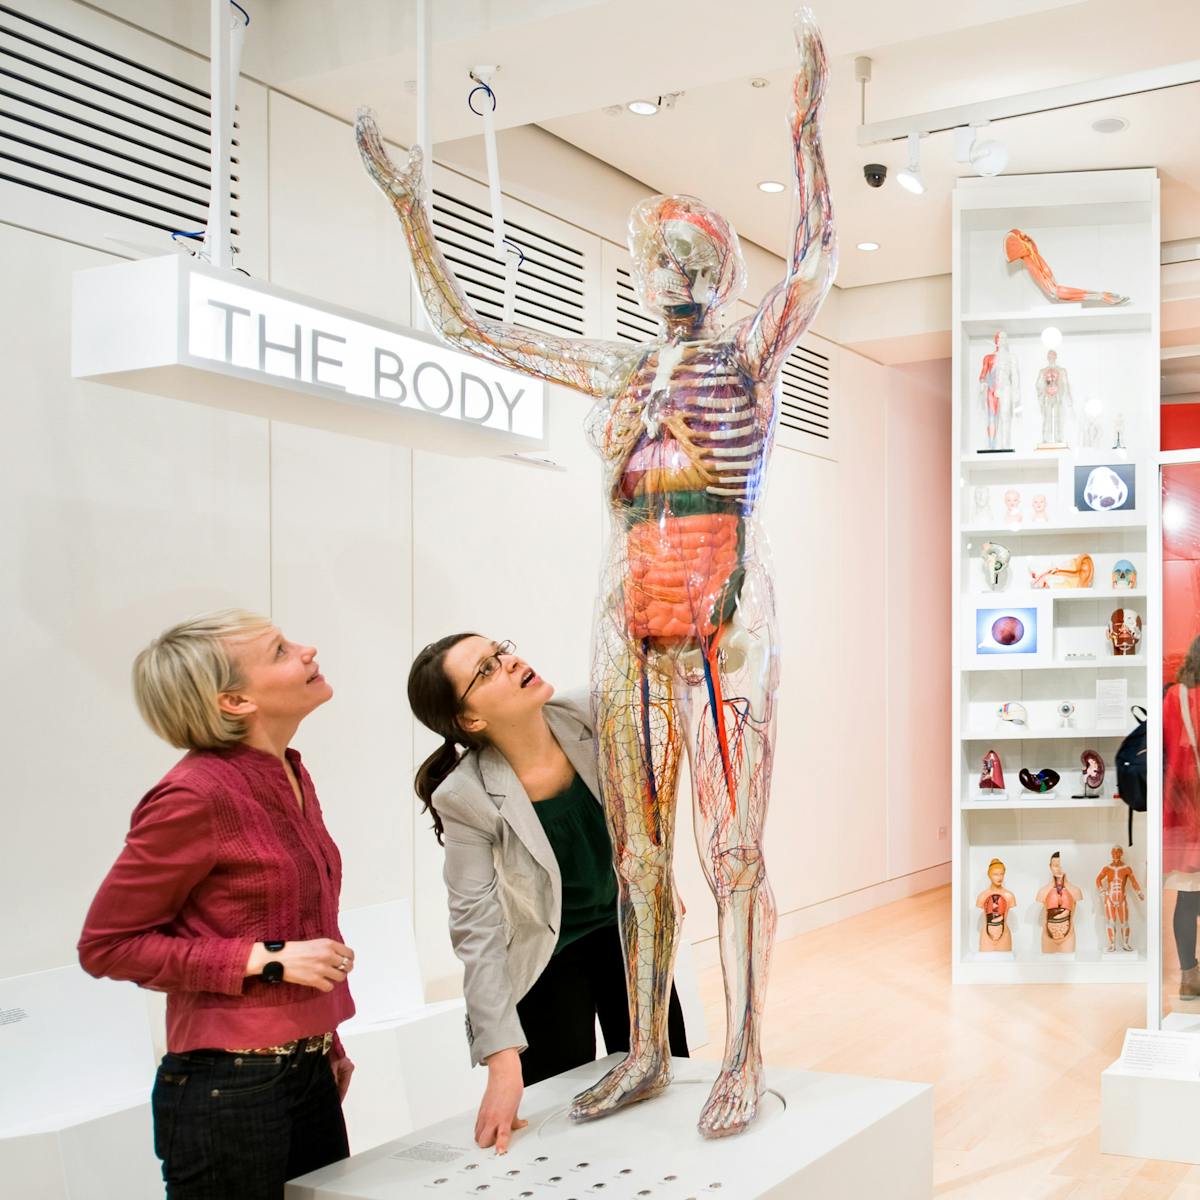 Photograph of the Medicine Now exhibition space at Wellcome Collection with visitors looking at the exhibits.